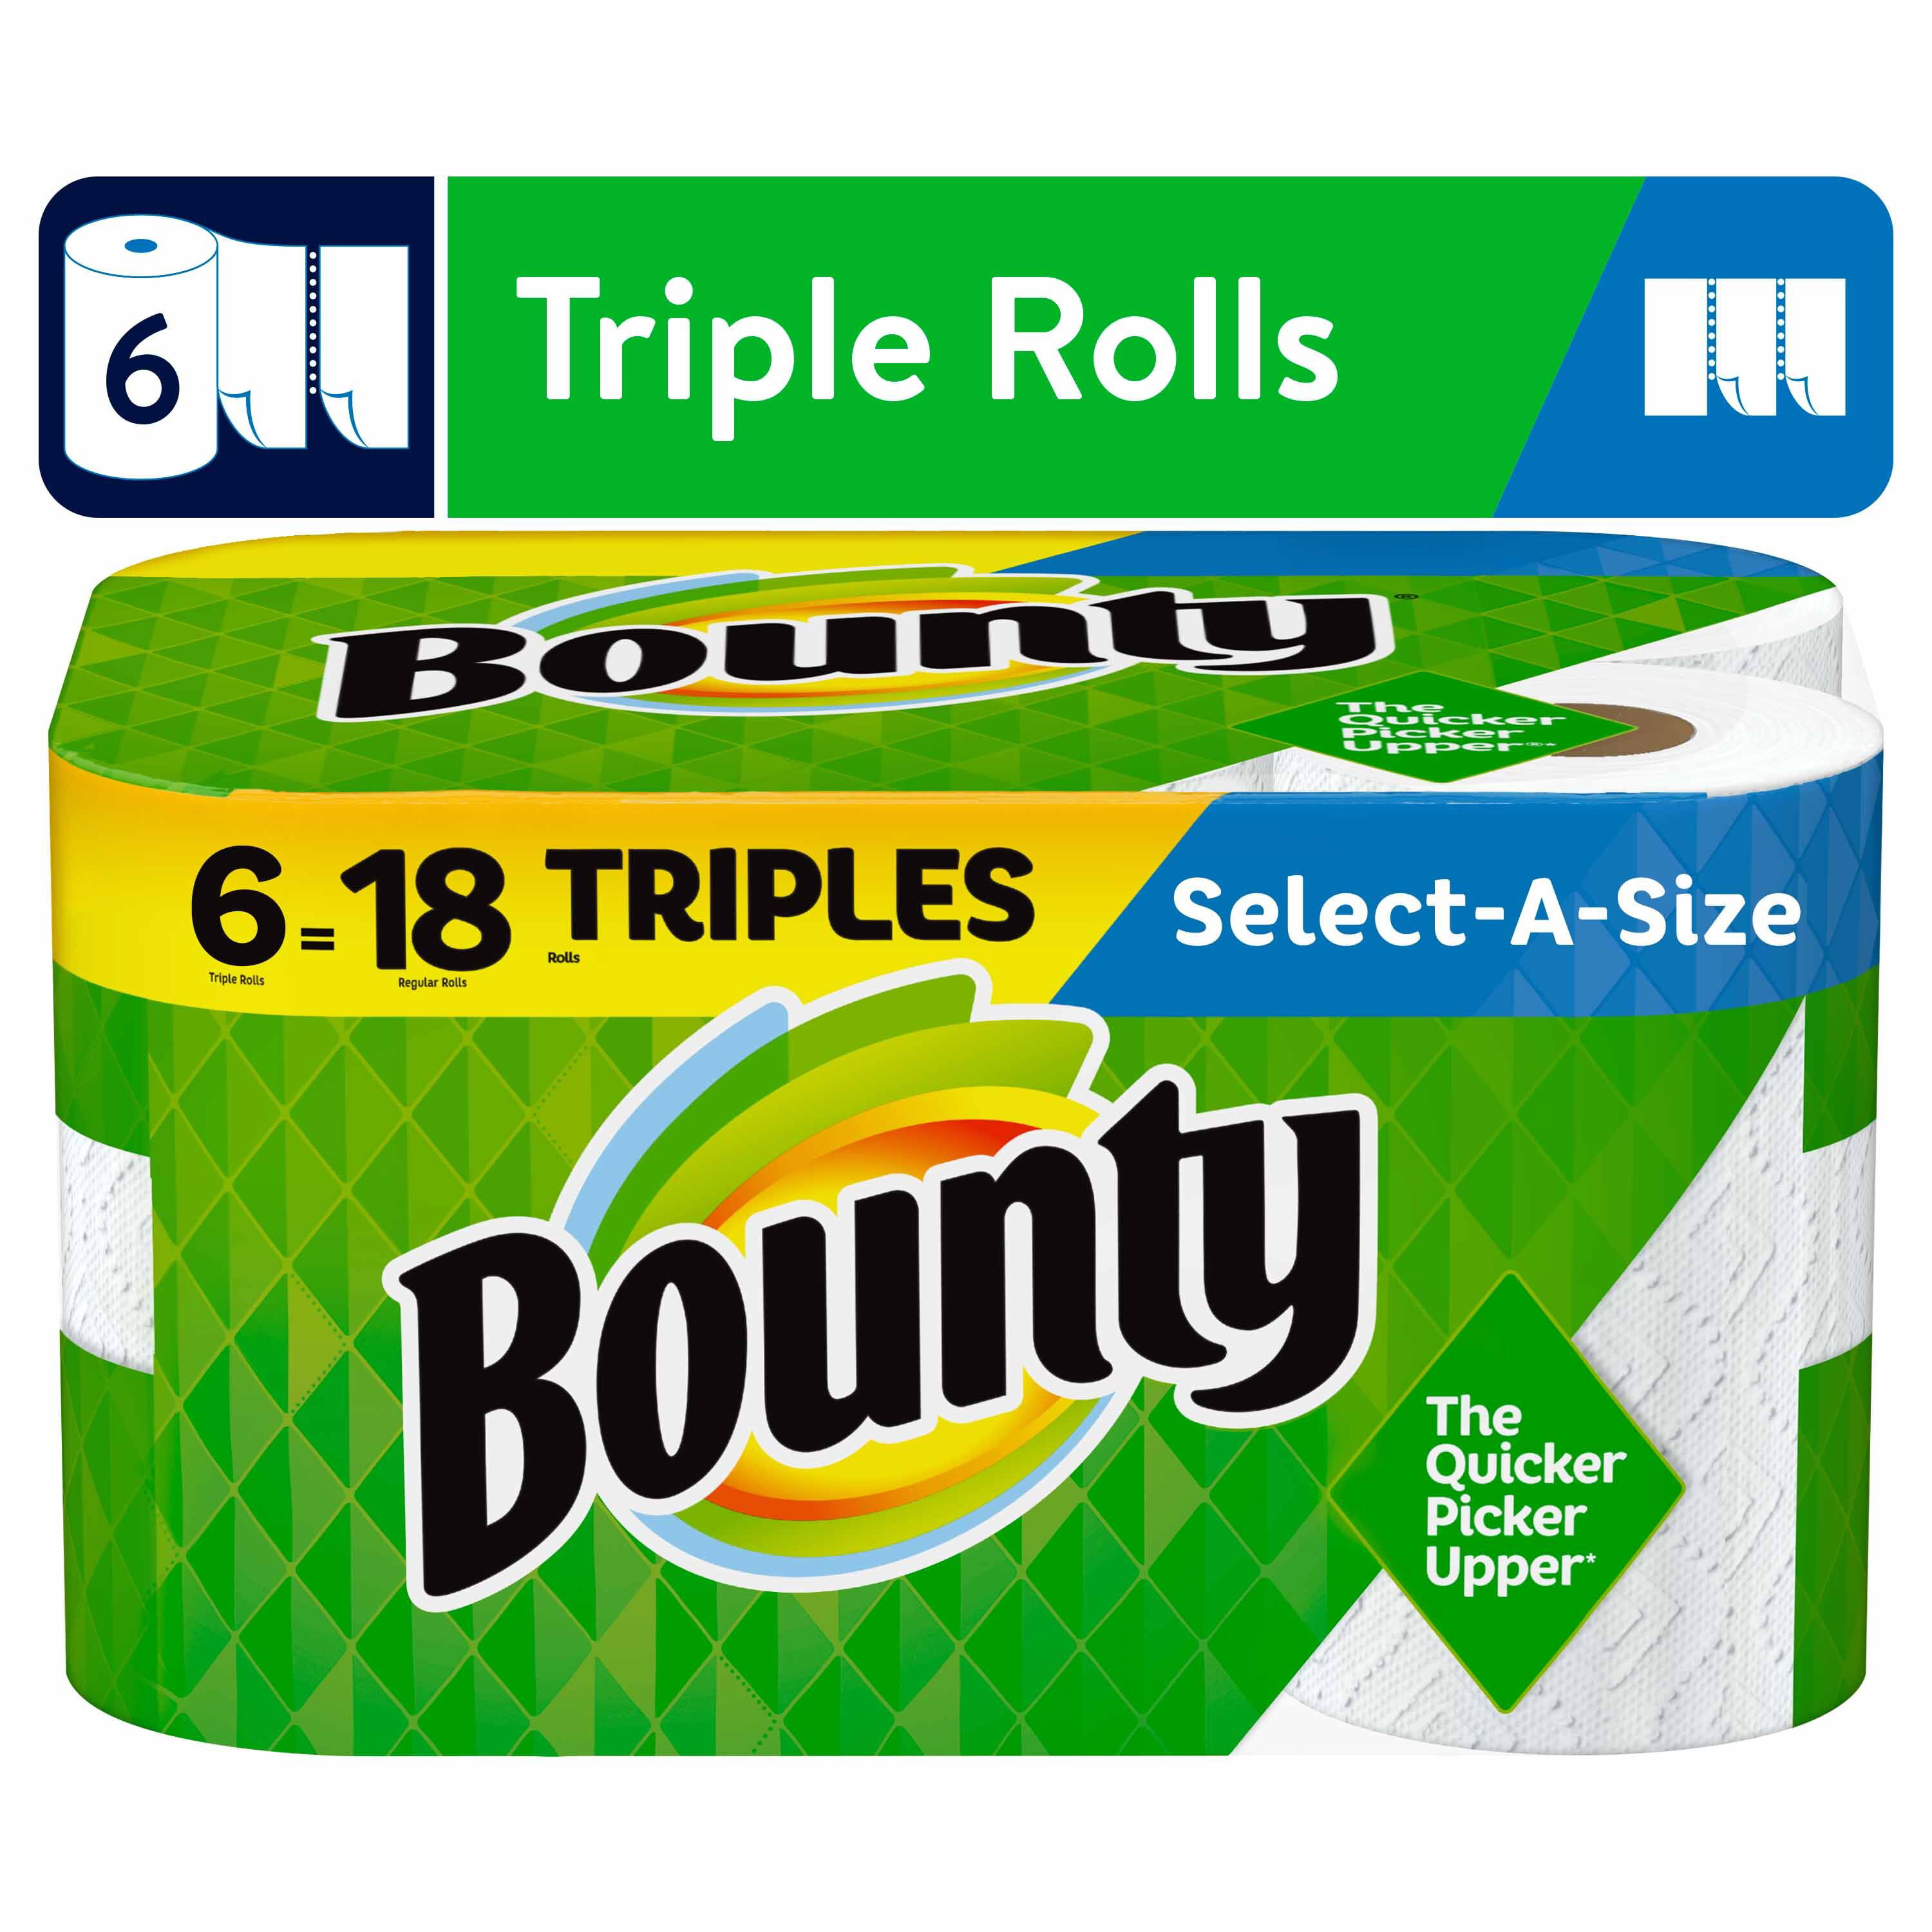 Quarter Size Sheets Details about   Brawny Tear-A-Square Paper Towels 16 Count of 128 Sheets 